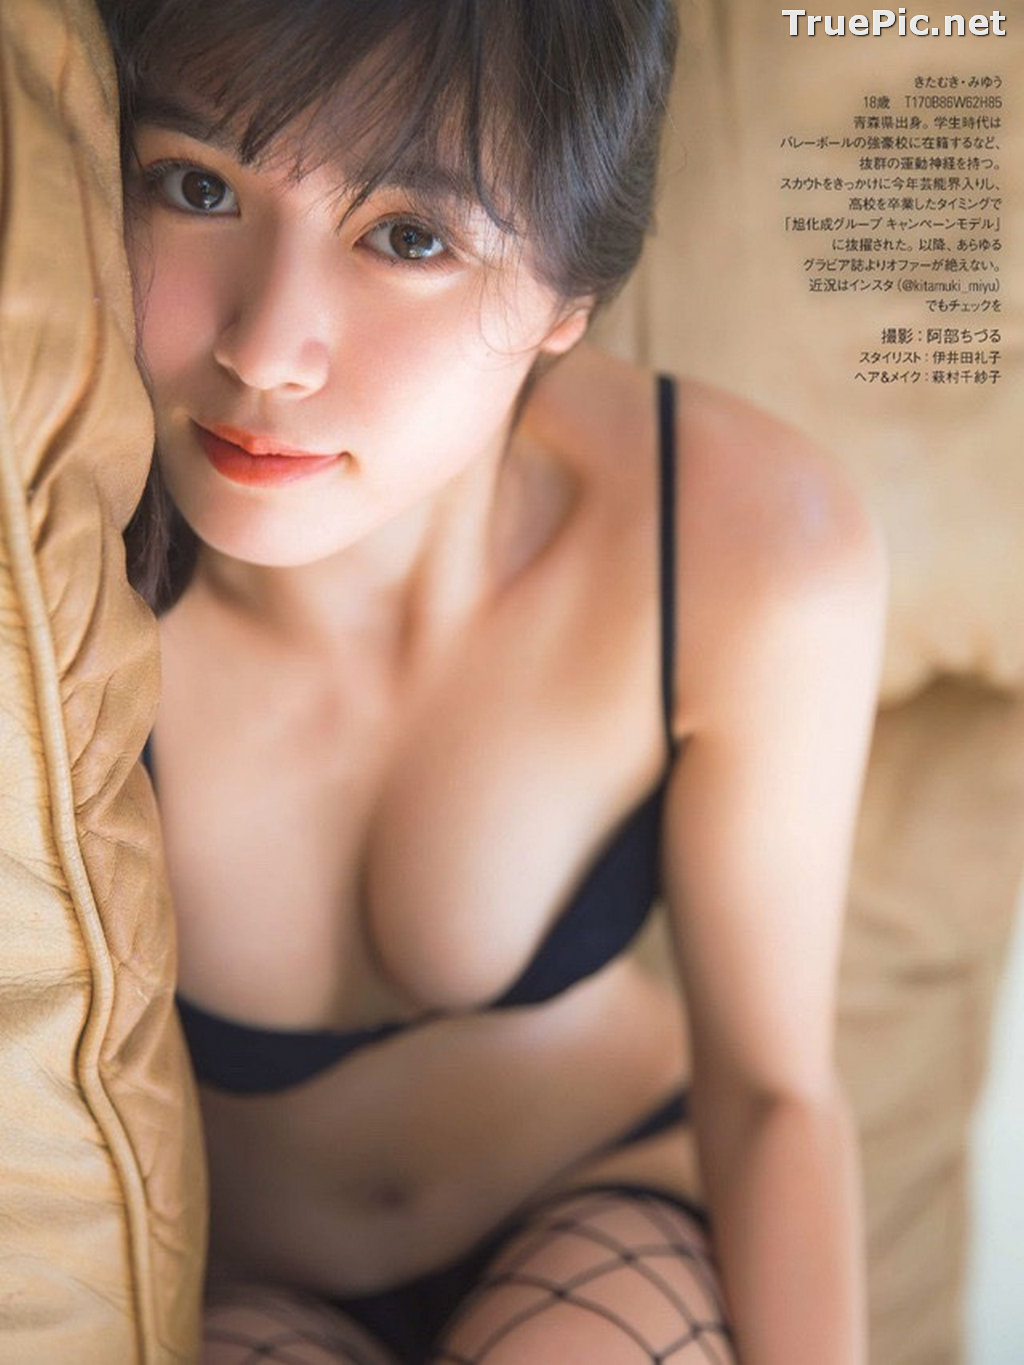 ImageJapanese Gravure Idol and Actress - Kitamuki Miyu (北向珠夕) - Sexy Picture Collection 2020 - TruePic.net - Picture-20